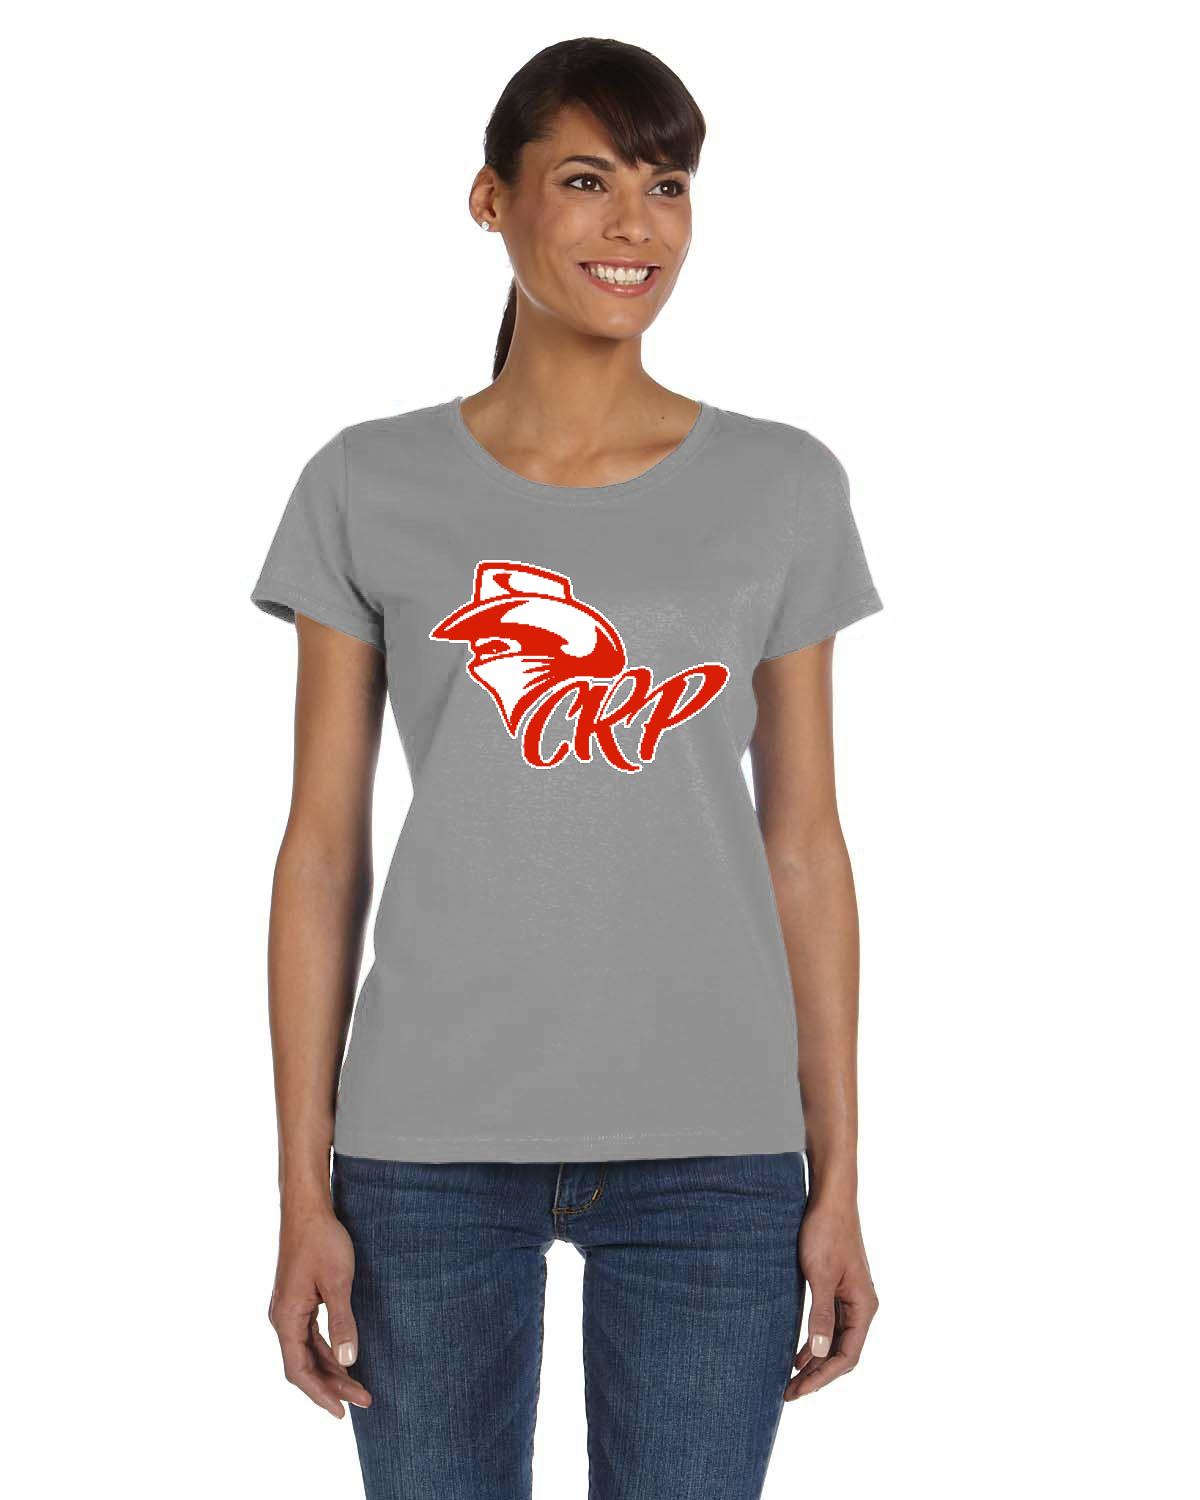 Cabral Racing Promotions Women's T-Shirt